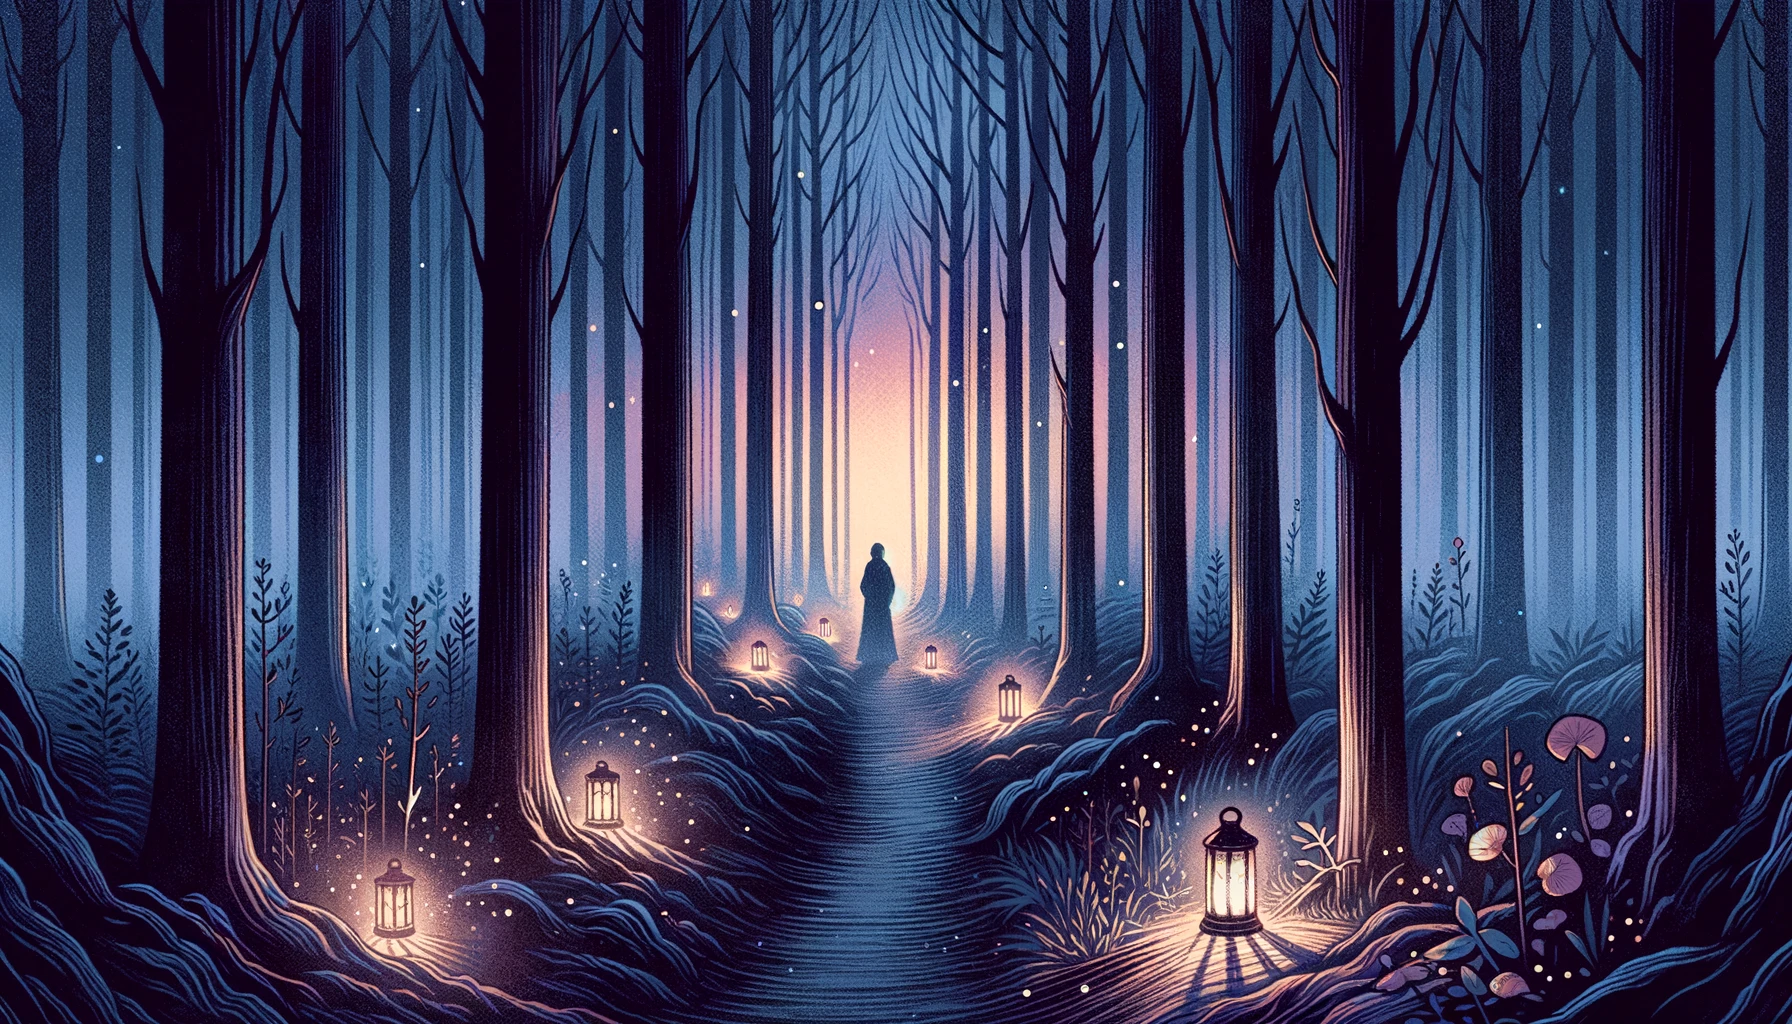 "A captivating visualization portraying a solitary figure navigating a misty, lantern-lit path through a forest at twilight. The imagery symbolizes the personal journey of letting go and the potential for renewal amidst the complexities of change. Through its evocative depiction, viewers are prompted to contemplate the transformative power of releasing the past and embracing new beginnings on the path toward personal growth and renewal."